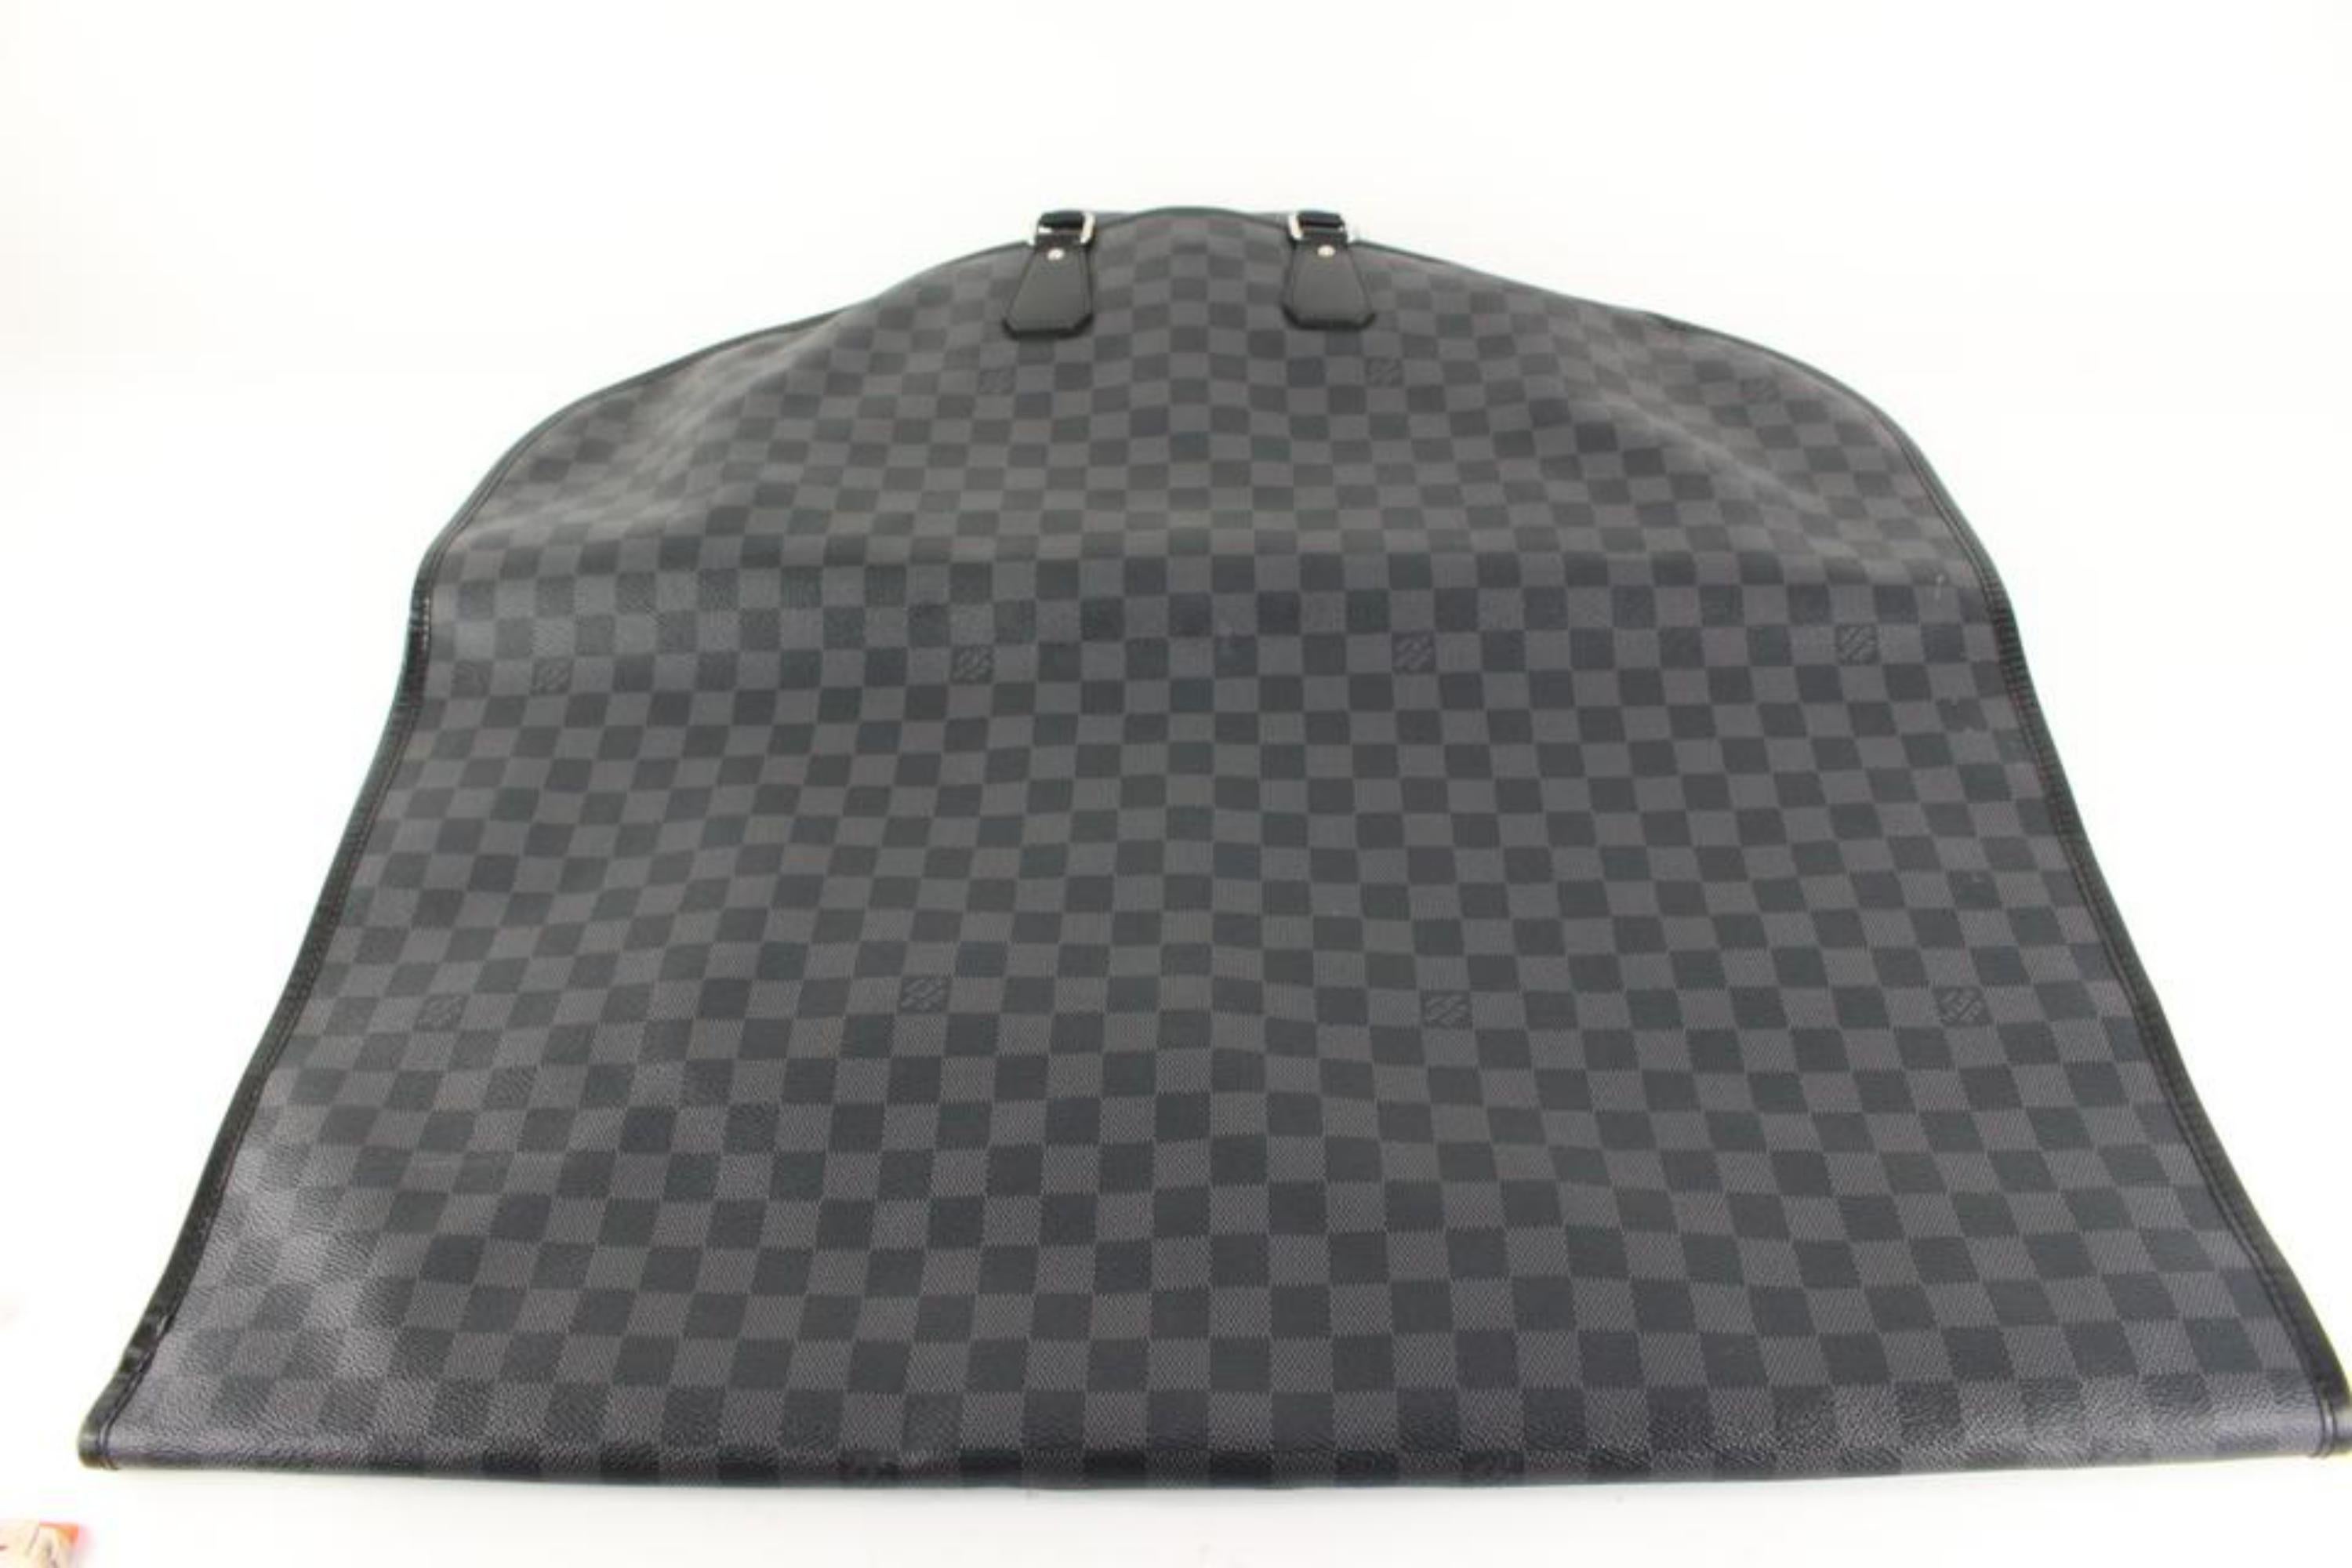 Louis Vuitton Damier Graphite Garment Cover Travel Bag 11lk531s In Good Condition In Dix hills, NY